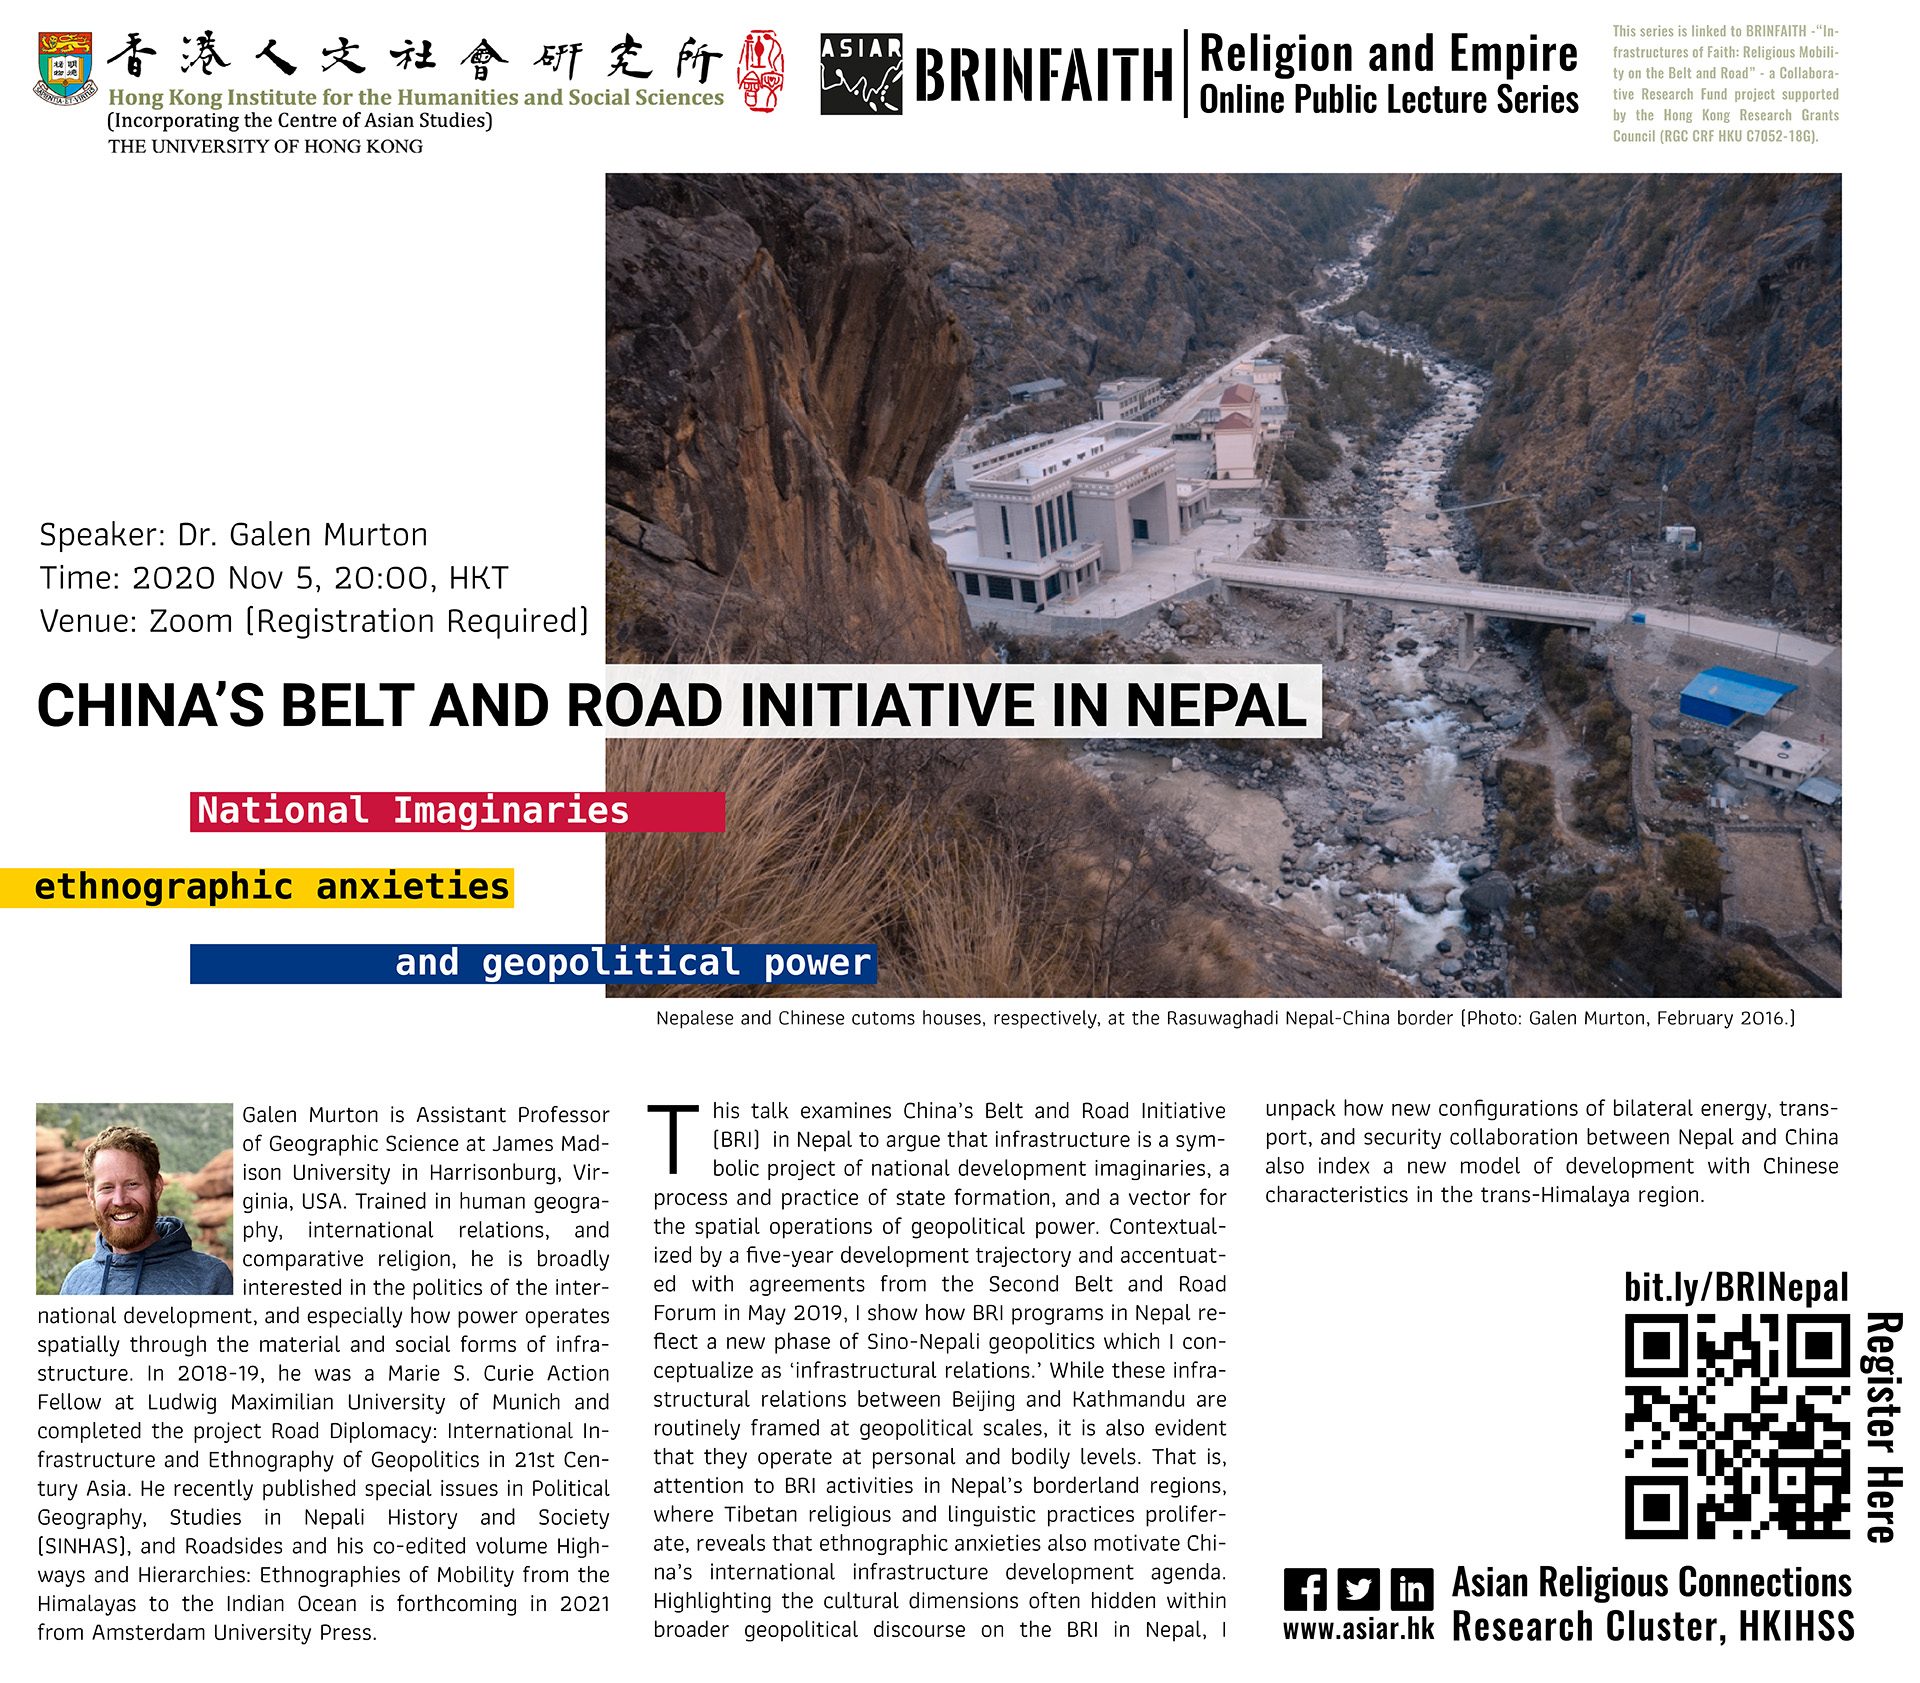 BRINFAITH Religion and Empire Lecture Series on “China’s Belt and Road Initiative in Nepal: National Imaginaries, Ethnographic Anxieties, and Geopolitical Power” by Dr. Galen Murton (November 5, 2020)